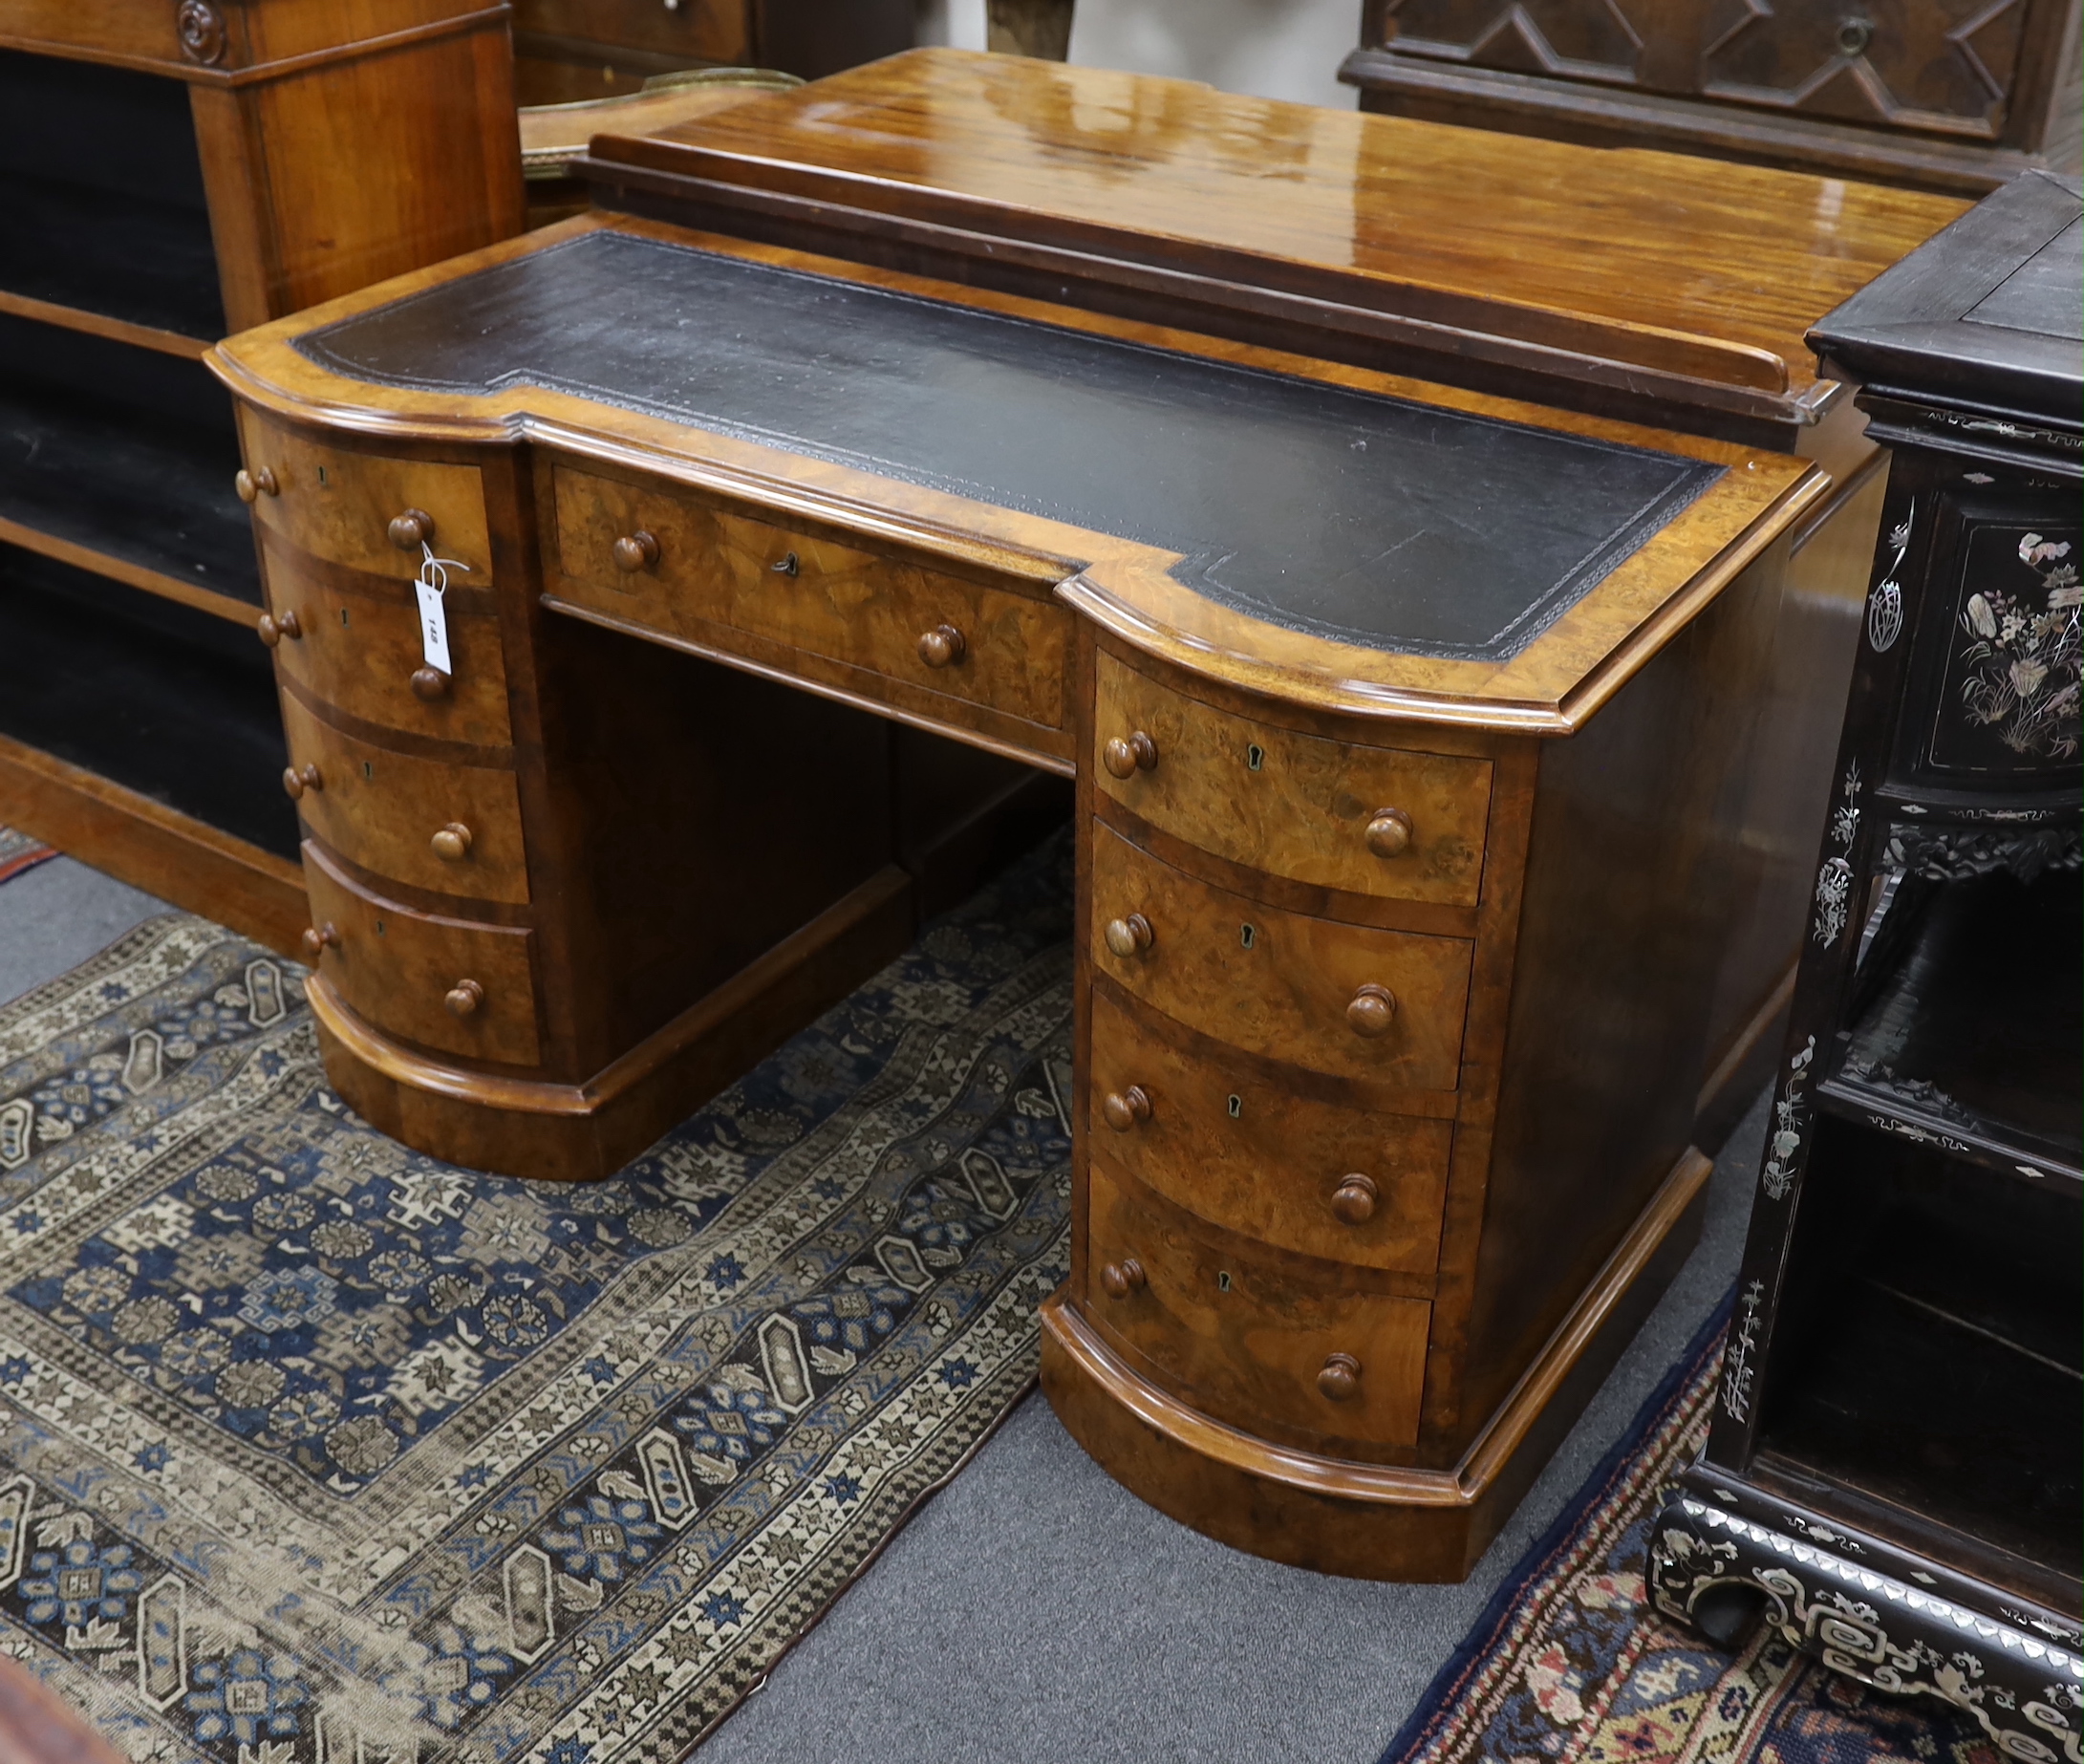 A Victorian burr walnut kneehole desk, width 119cm, depth 52cm, height 70cm together with an Edwardian inlaid low seat chair